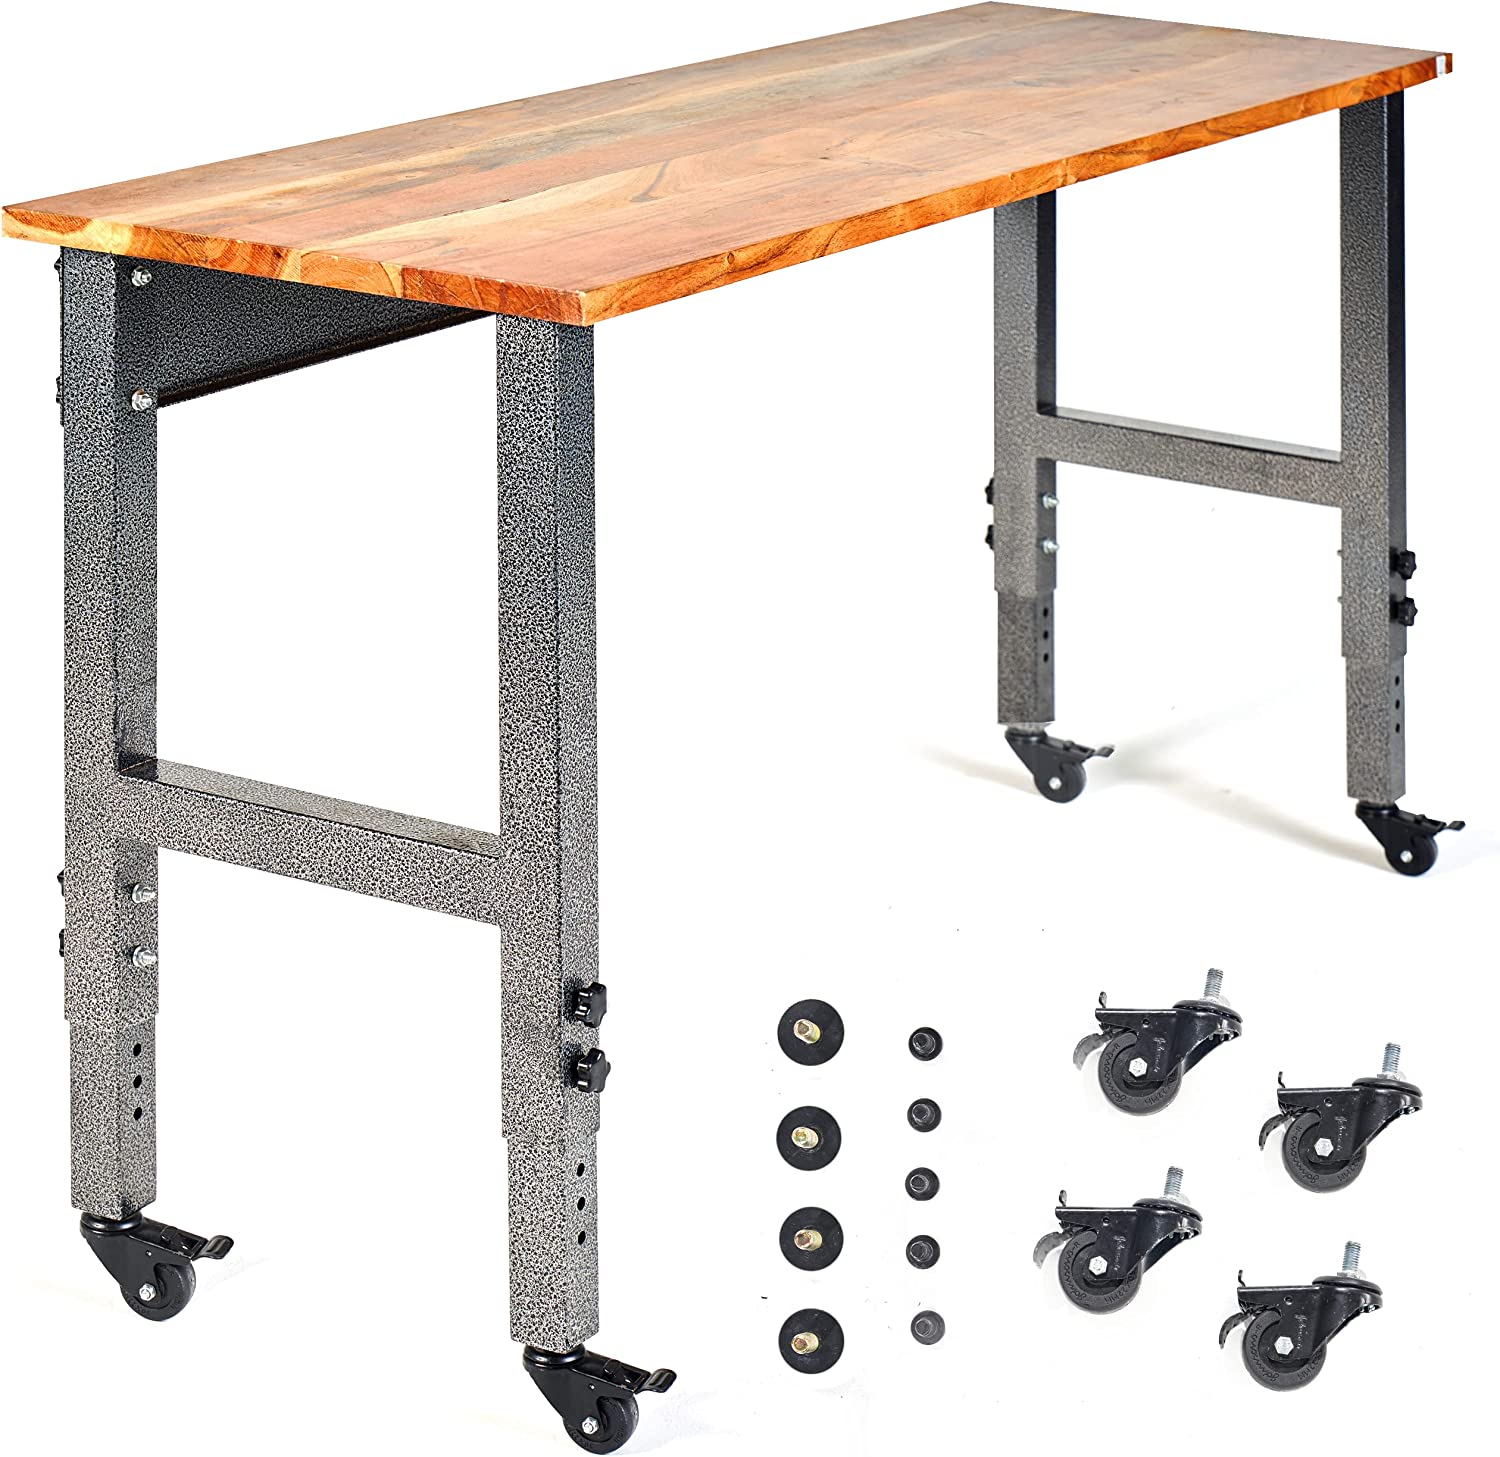 Fedmax Work Bench - 48" Rolling Portable Workbench for Garage - Metal with Acacia Hardwood Top, Adjustable Legs - $119.99